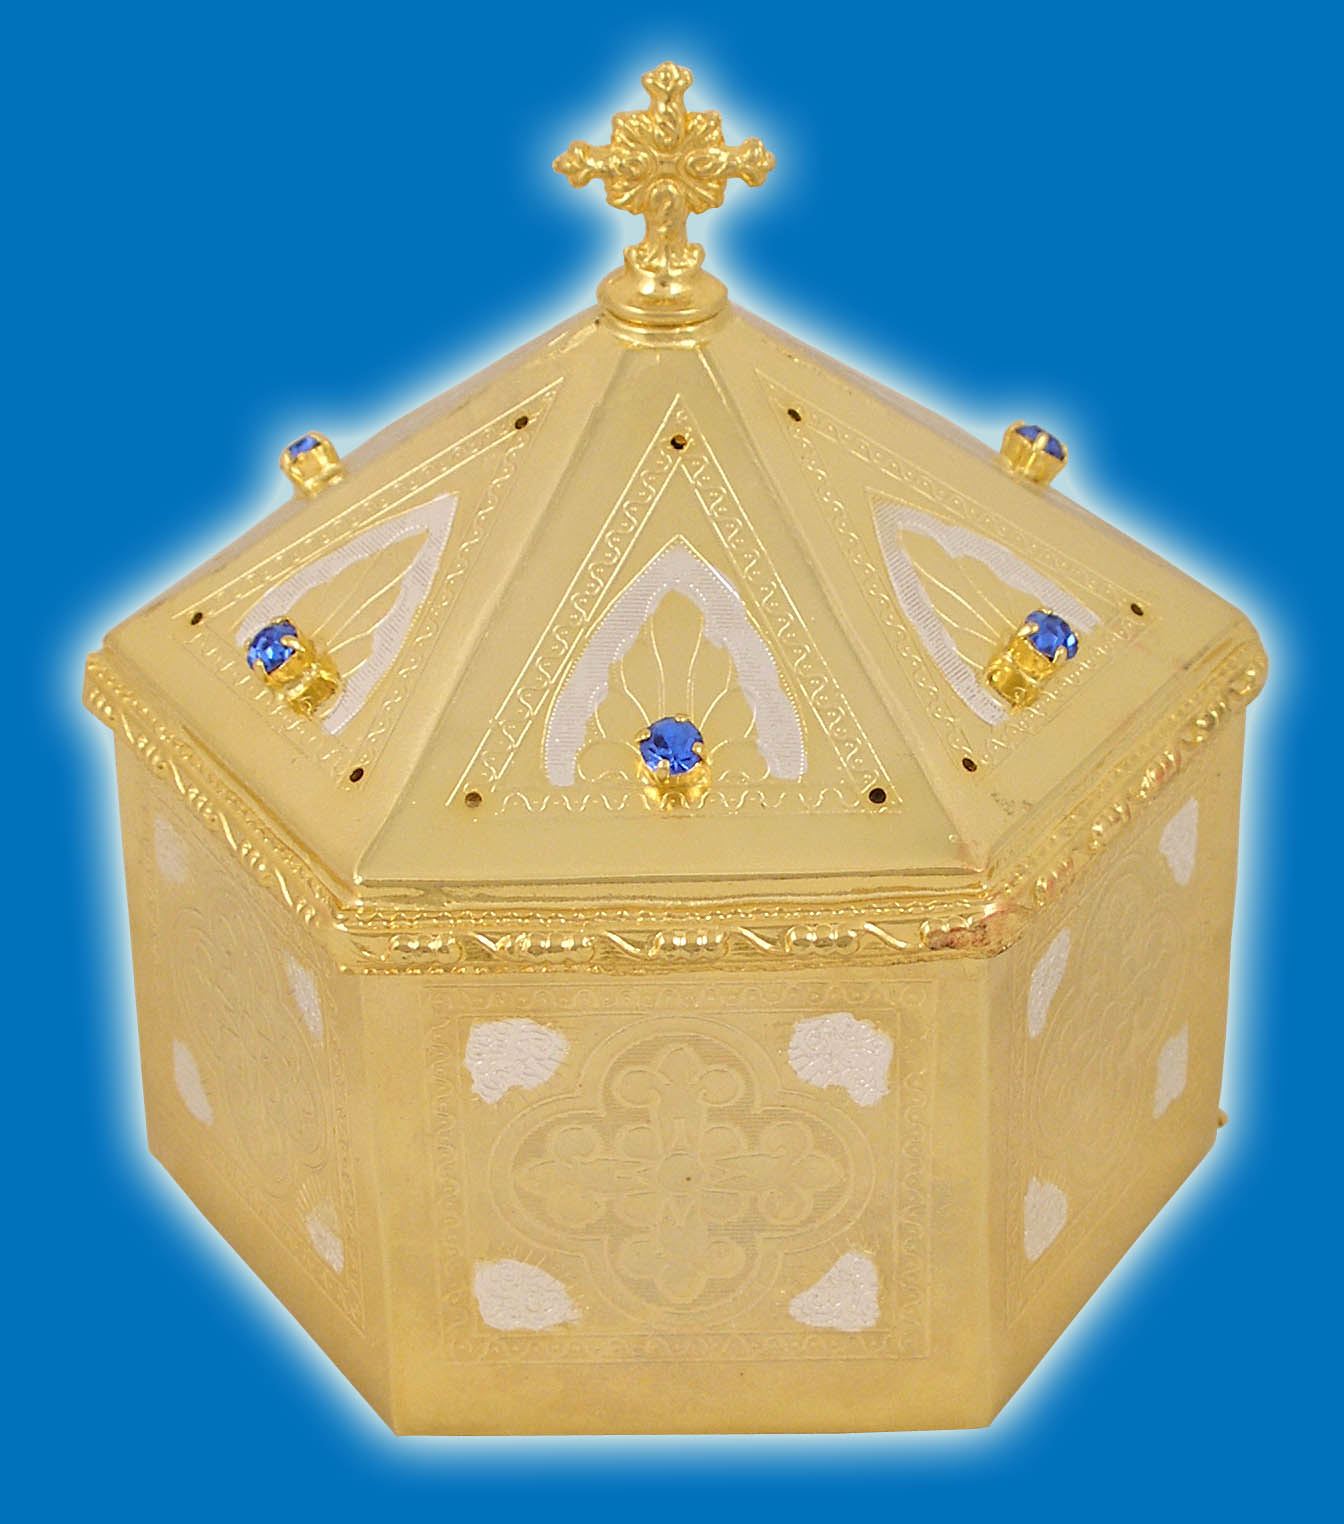 Reliquary or Relics Box - Tabernacle Hexagon Gold and Silver Plated